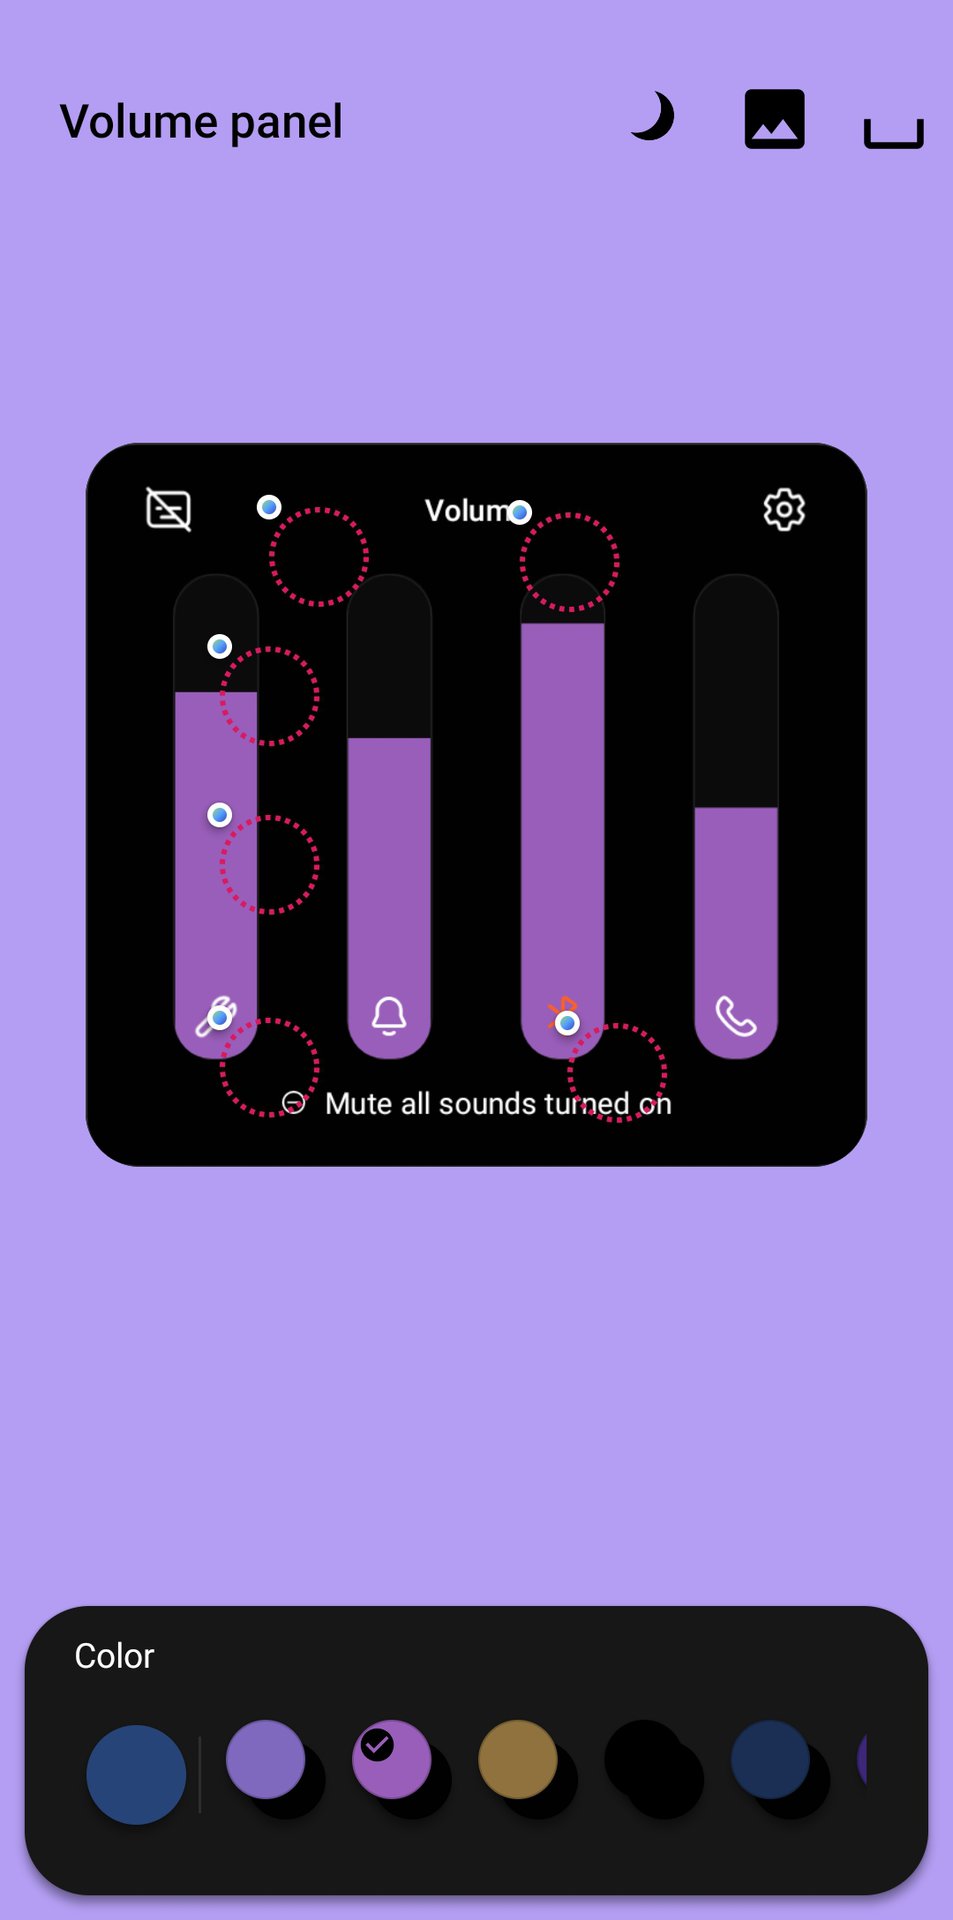 Setting the colors for the volume panel in the Samsung Theme Park app.